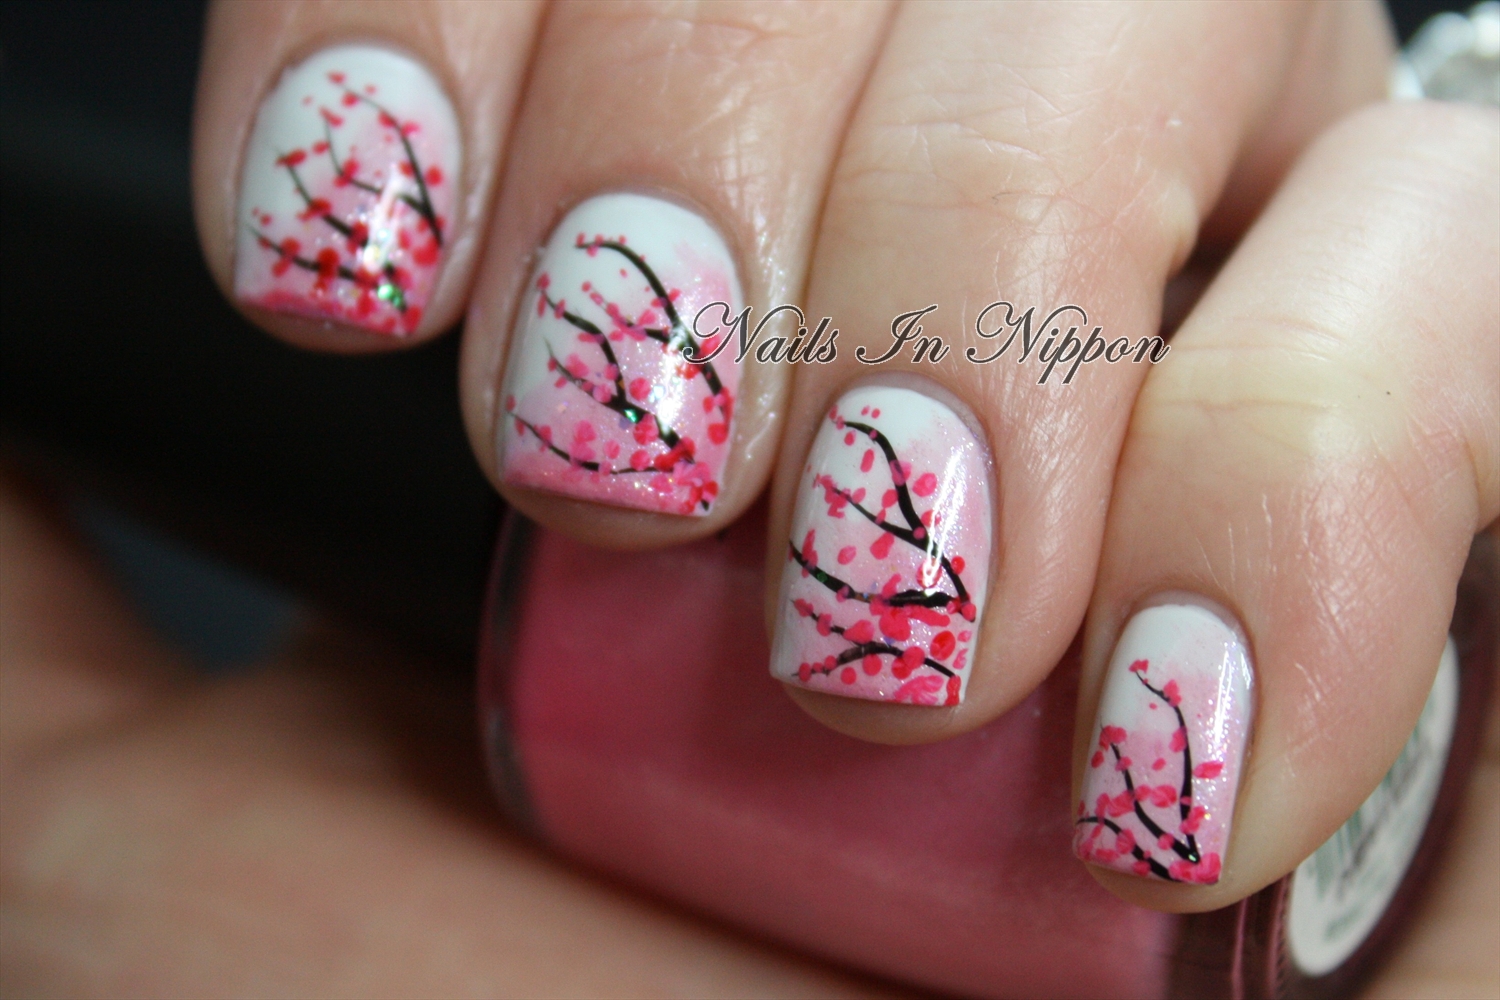 7. Tan and Gray Abstract Nail Art with Pink Details - wide 8